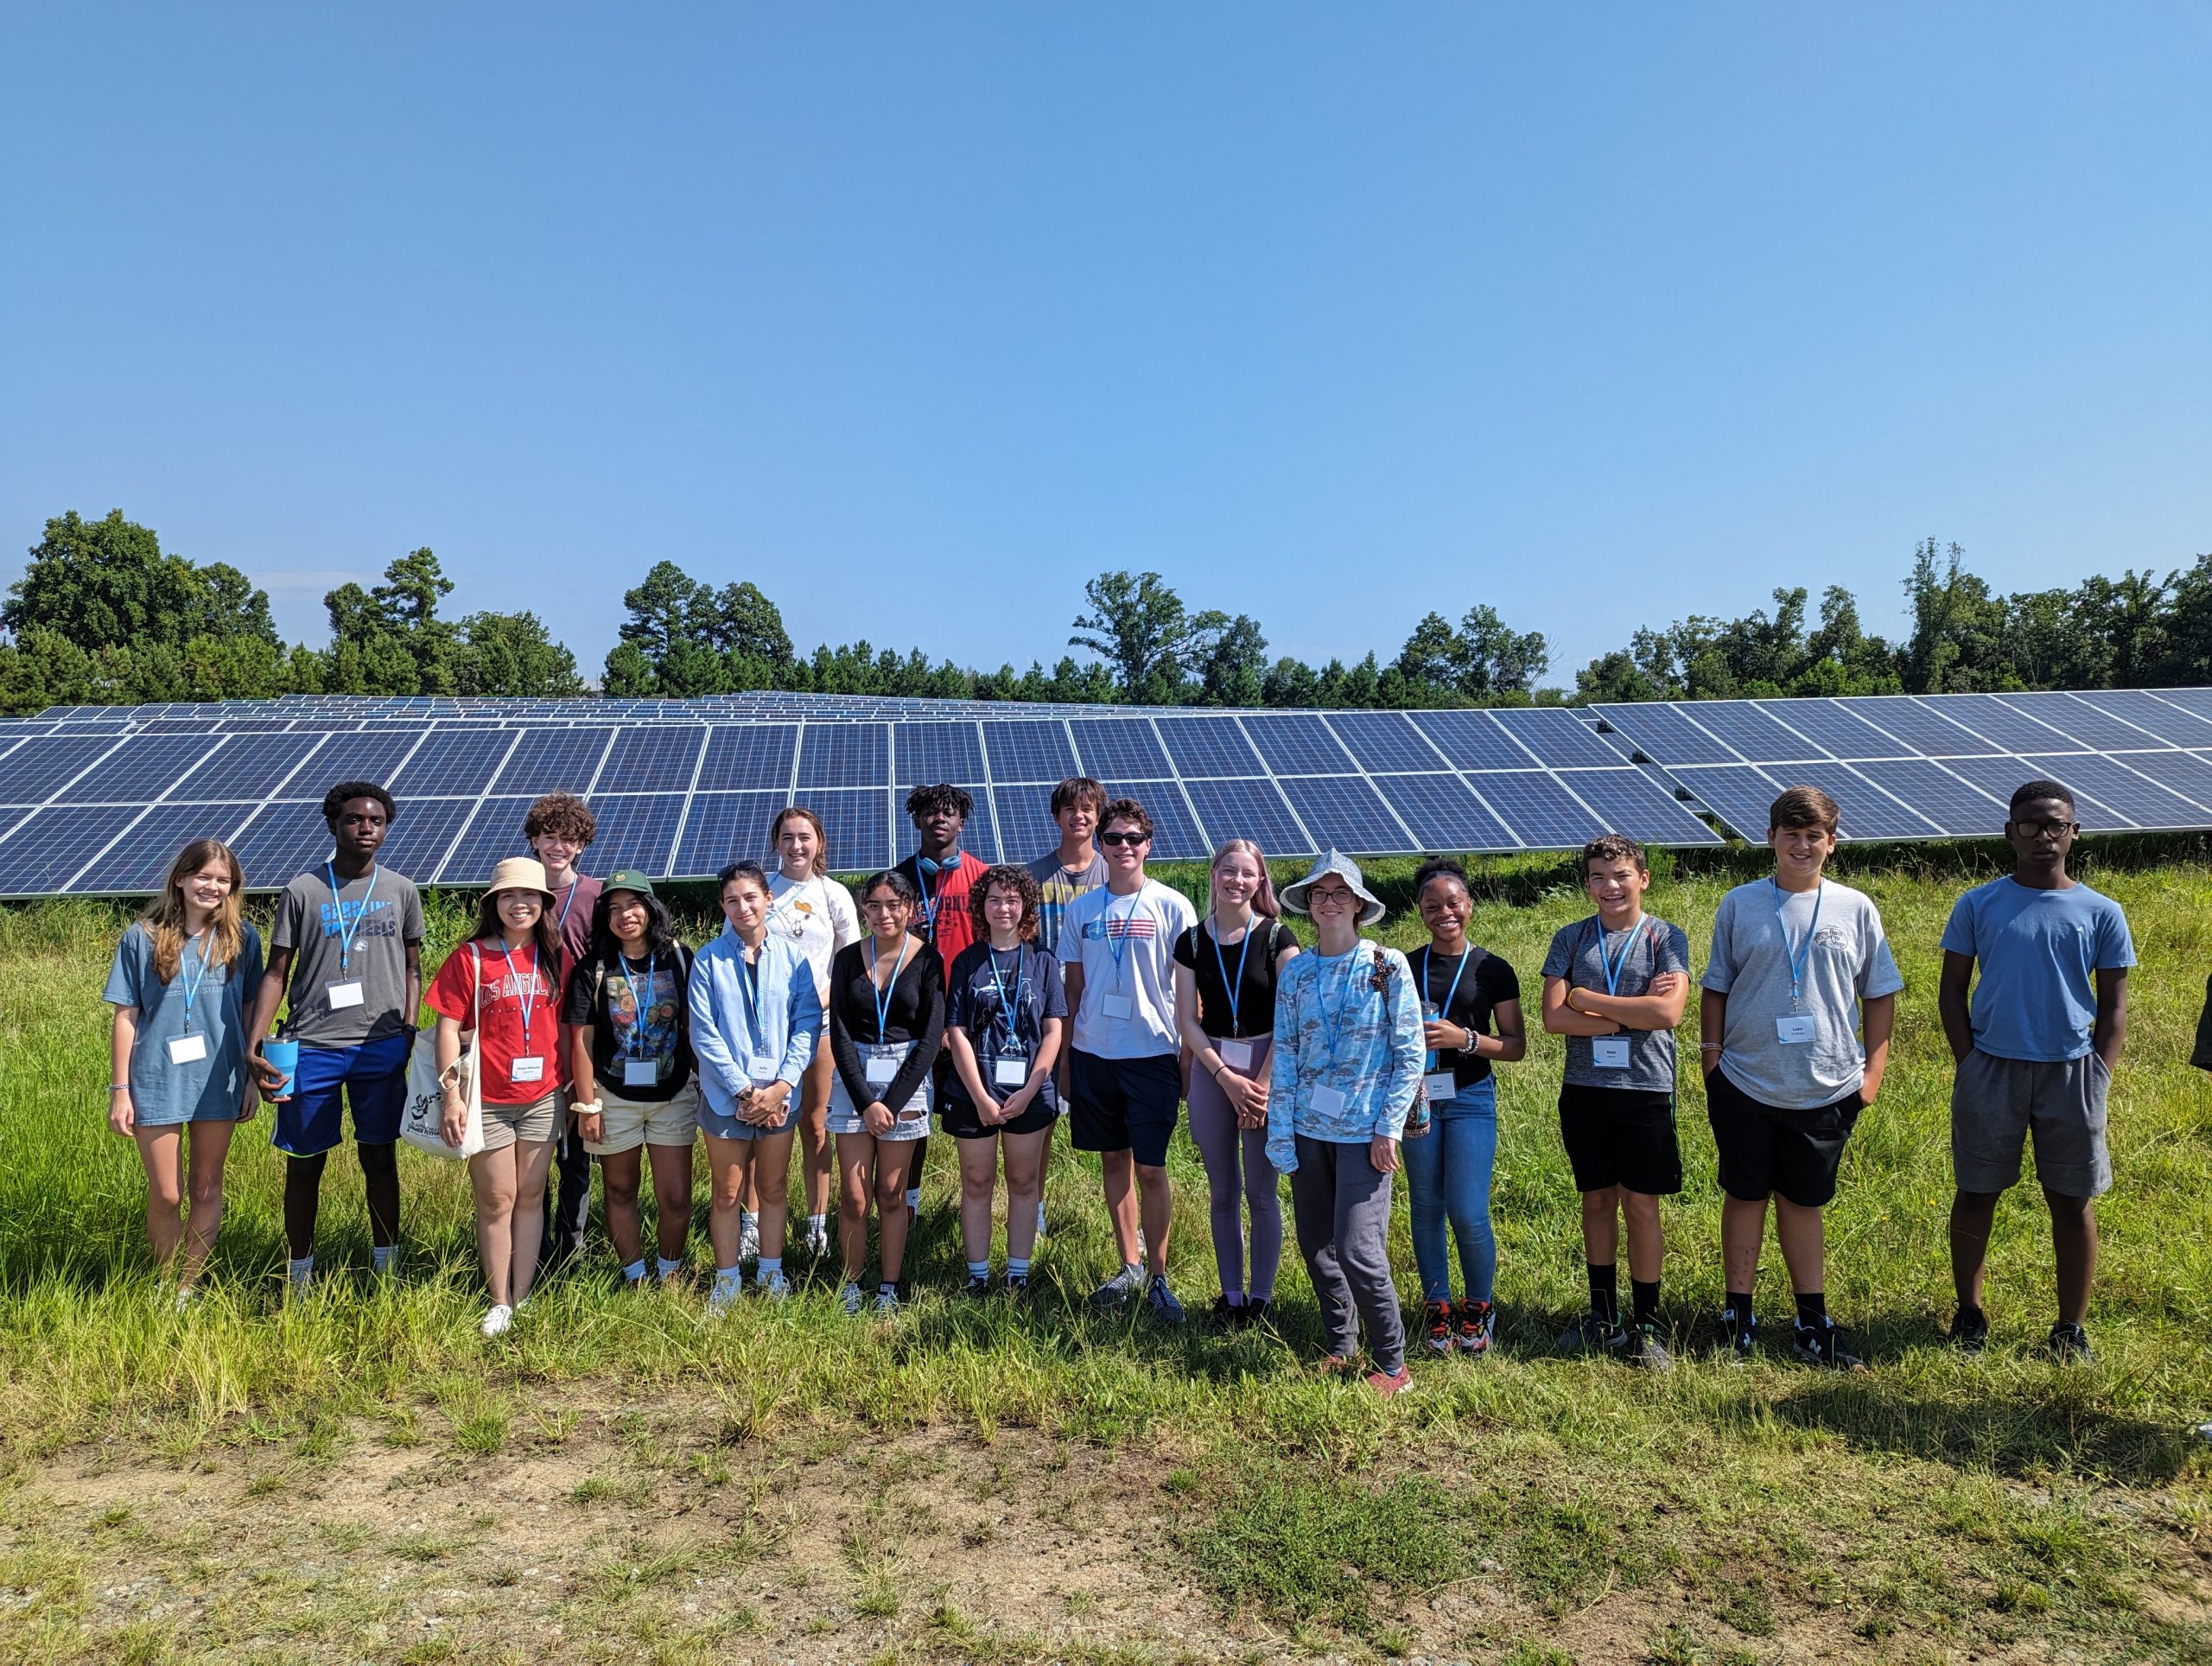 Students in front of solar panels.